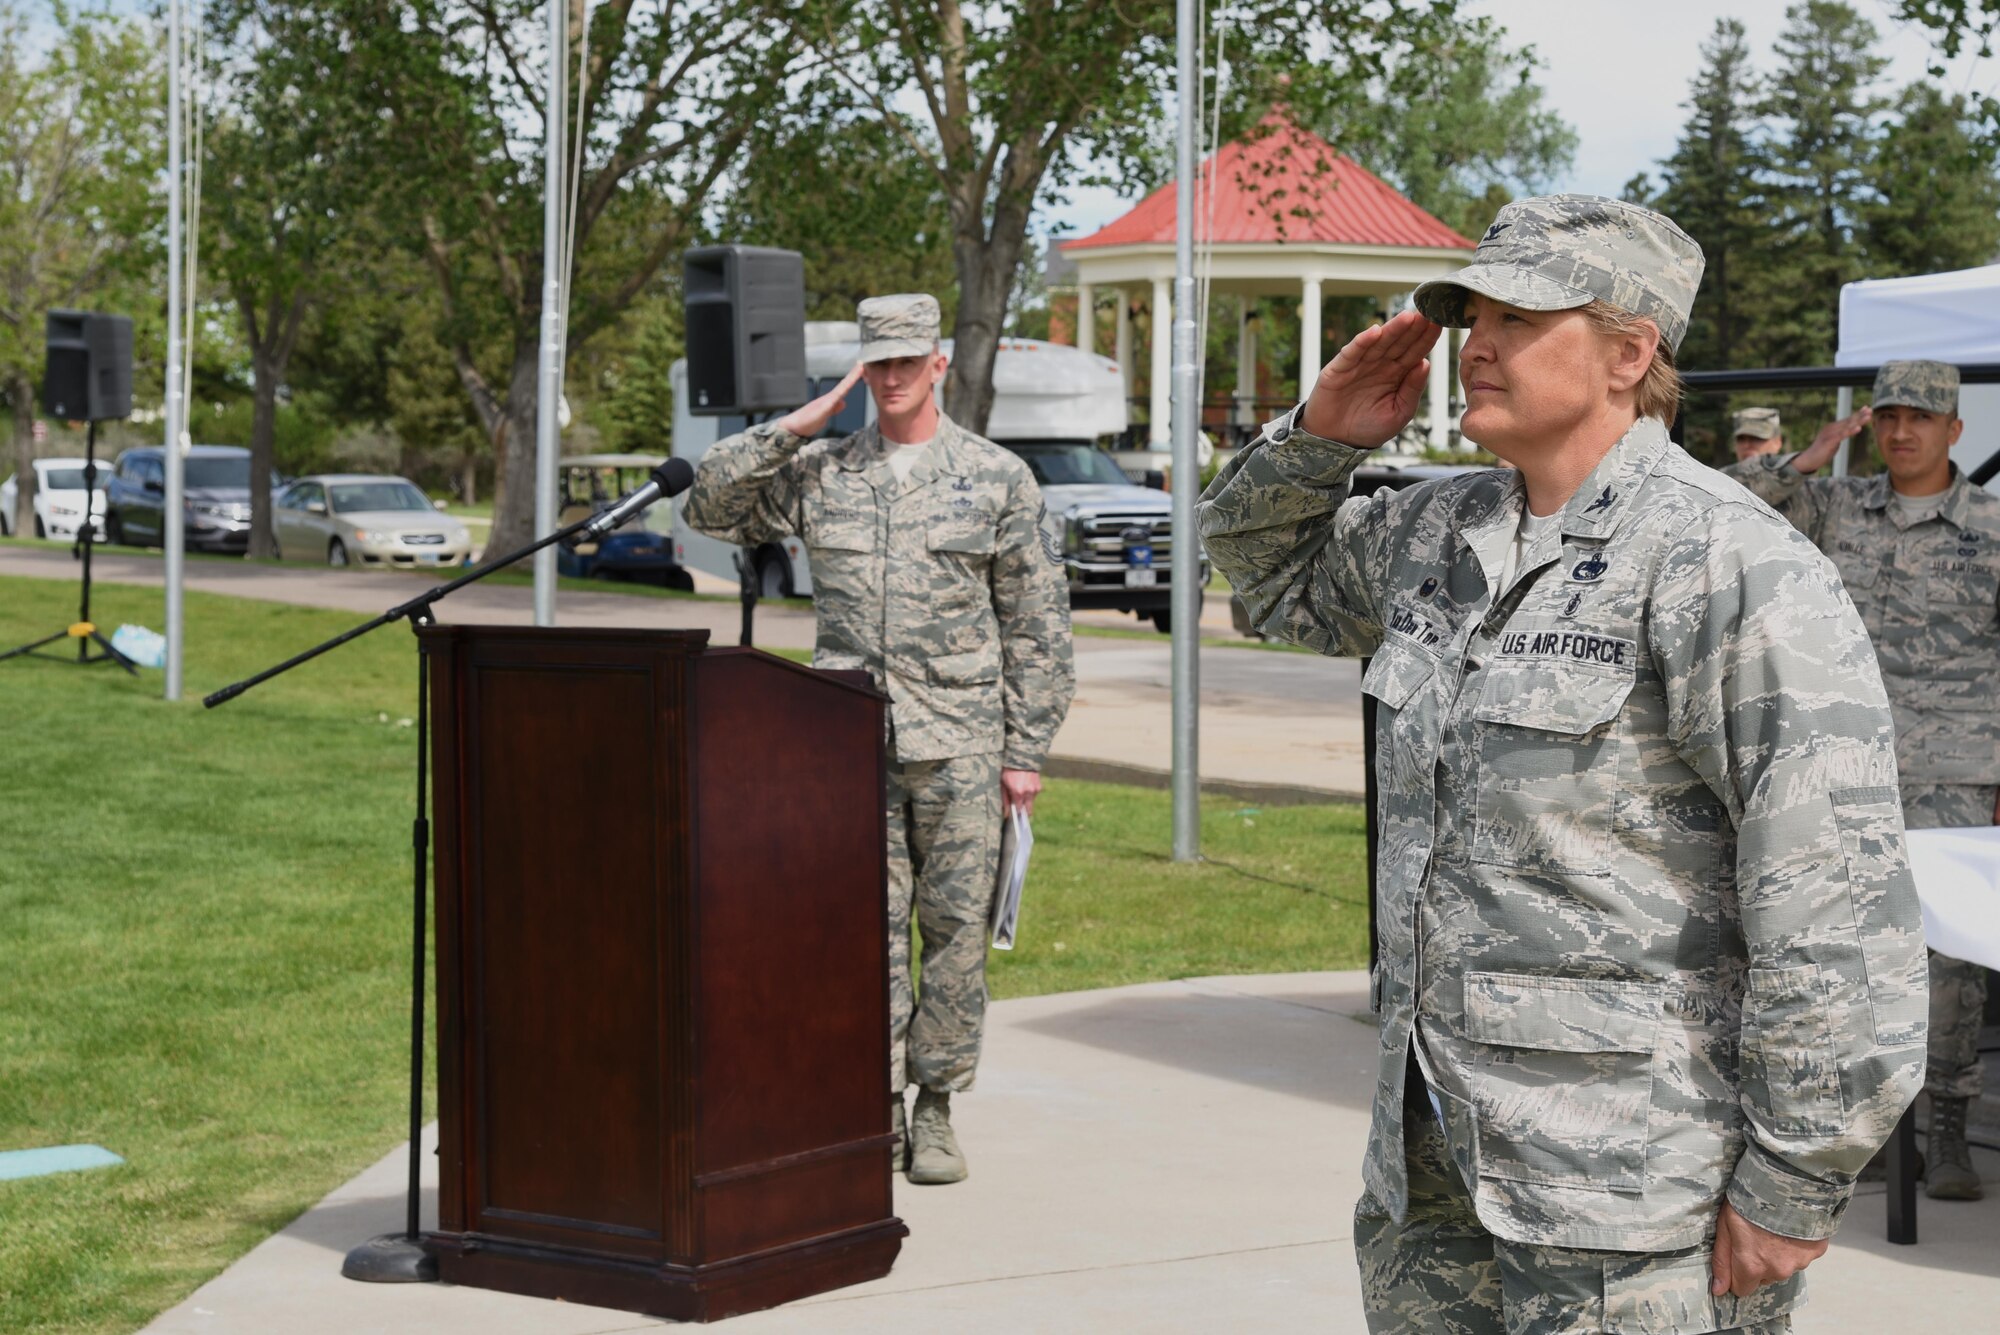 Colonel Tricia Van Den Top renders her first salute as commander to her troops at the 90th MSG Change of Command on the Argonne Parade Field at F.E. Warren Air Force Base, Wyo., June 16, 2017. Van Den Top assumed command of the group during the ceremony which represents a formal transition of authority from the outgoing commanding to the incoming commander. (U.S. Air Force photo by Glenn S. Robertson)